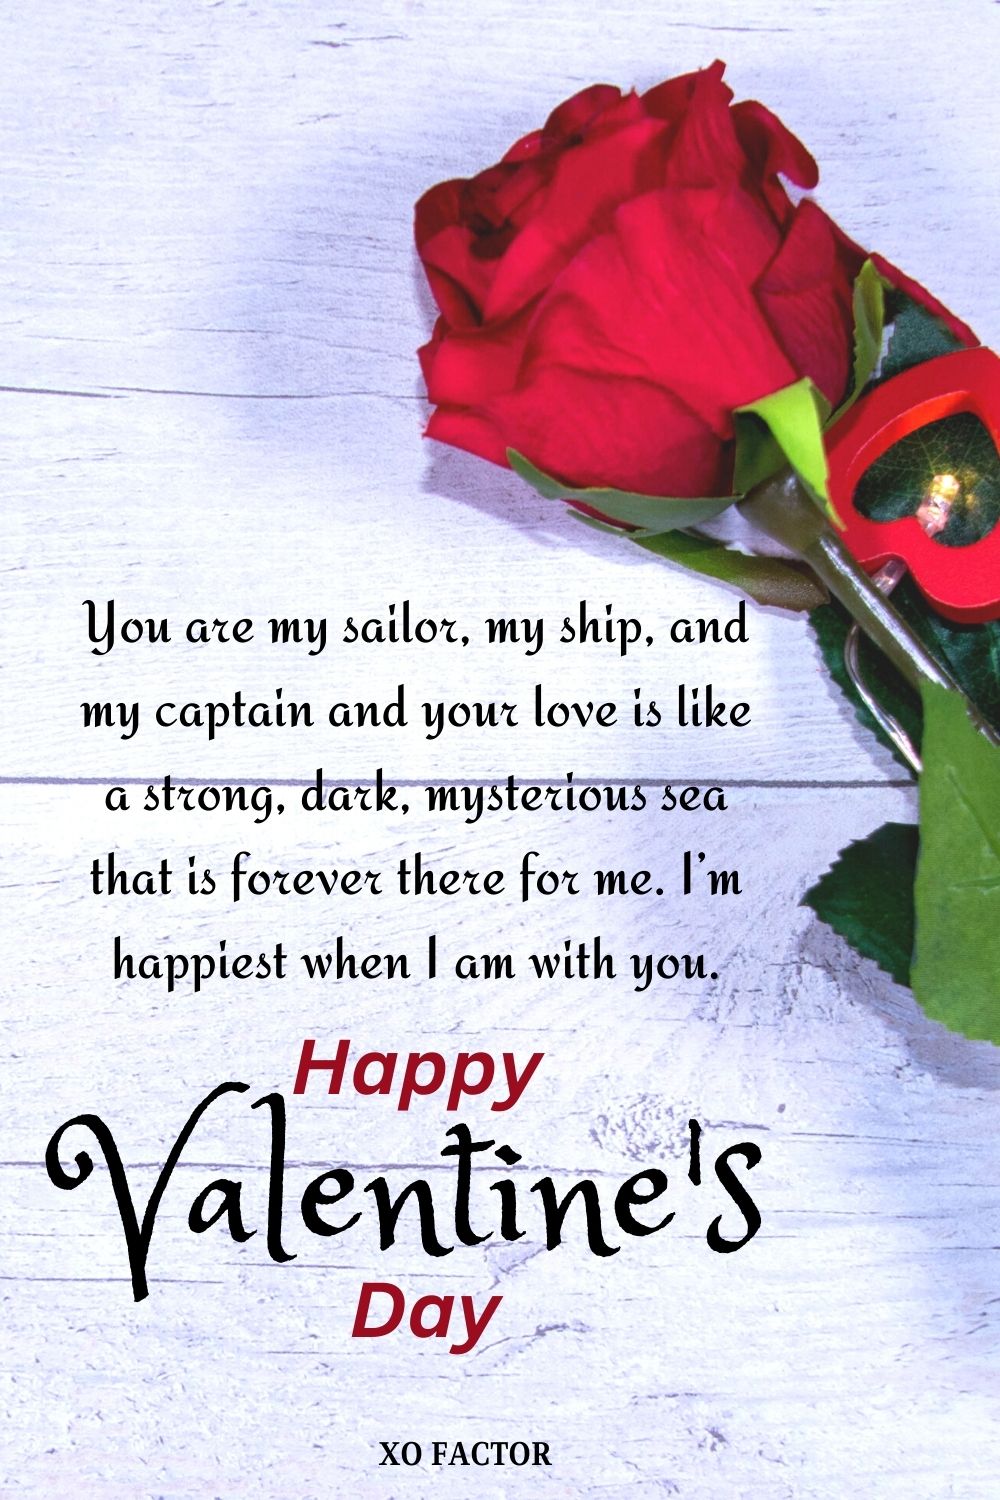 You are my sailor, my ship, and my captain and your love is like a strong, dark, mysterious sea that is forever there for me. I’m happiest when I am with you. Happy Valentine’s Day!